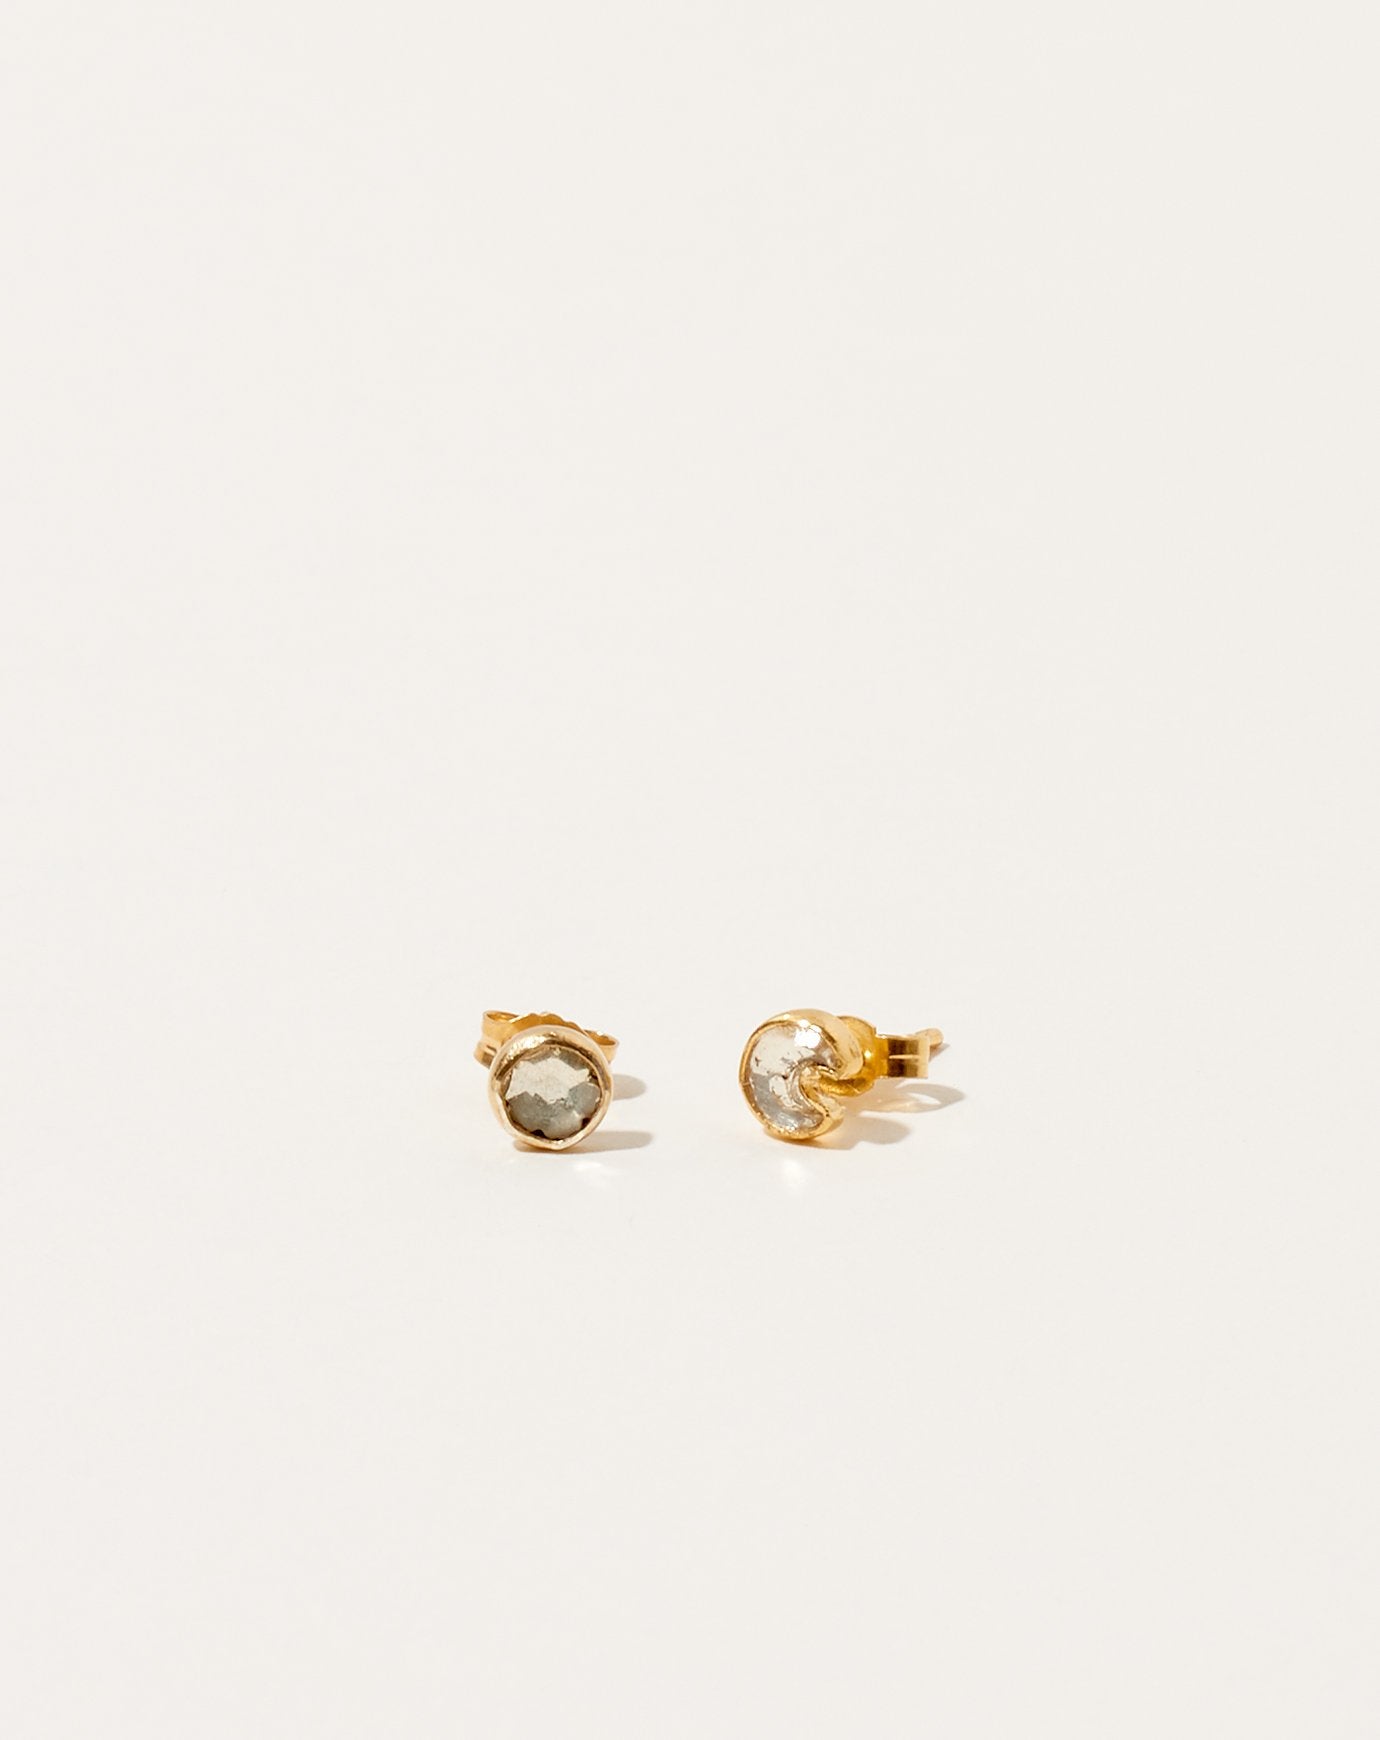 Grainne Morton Mismatched Tiny Flower and Moon Studs